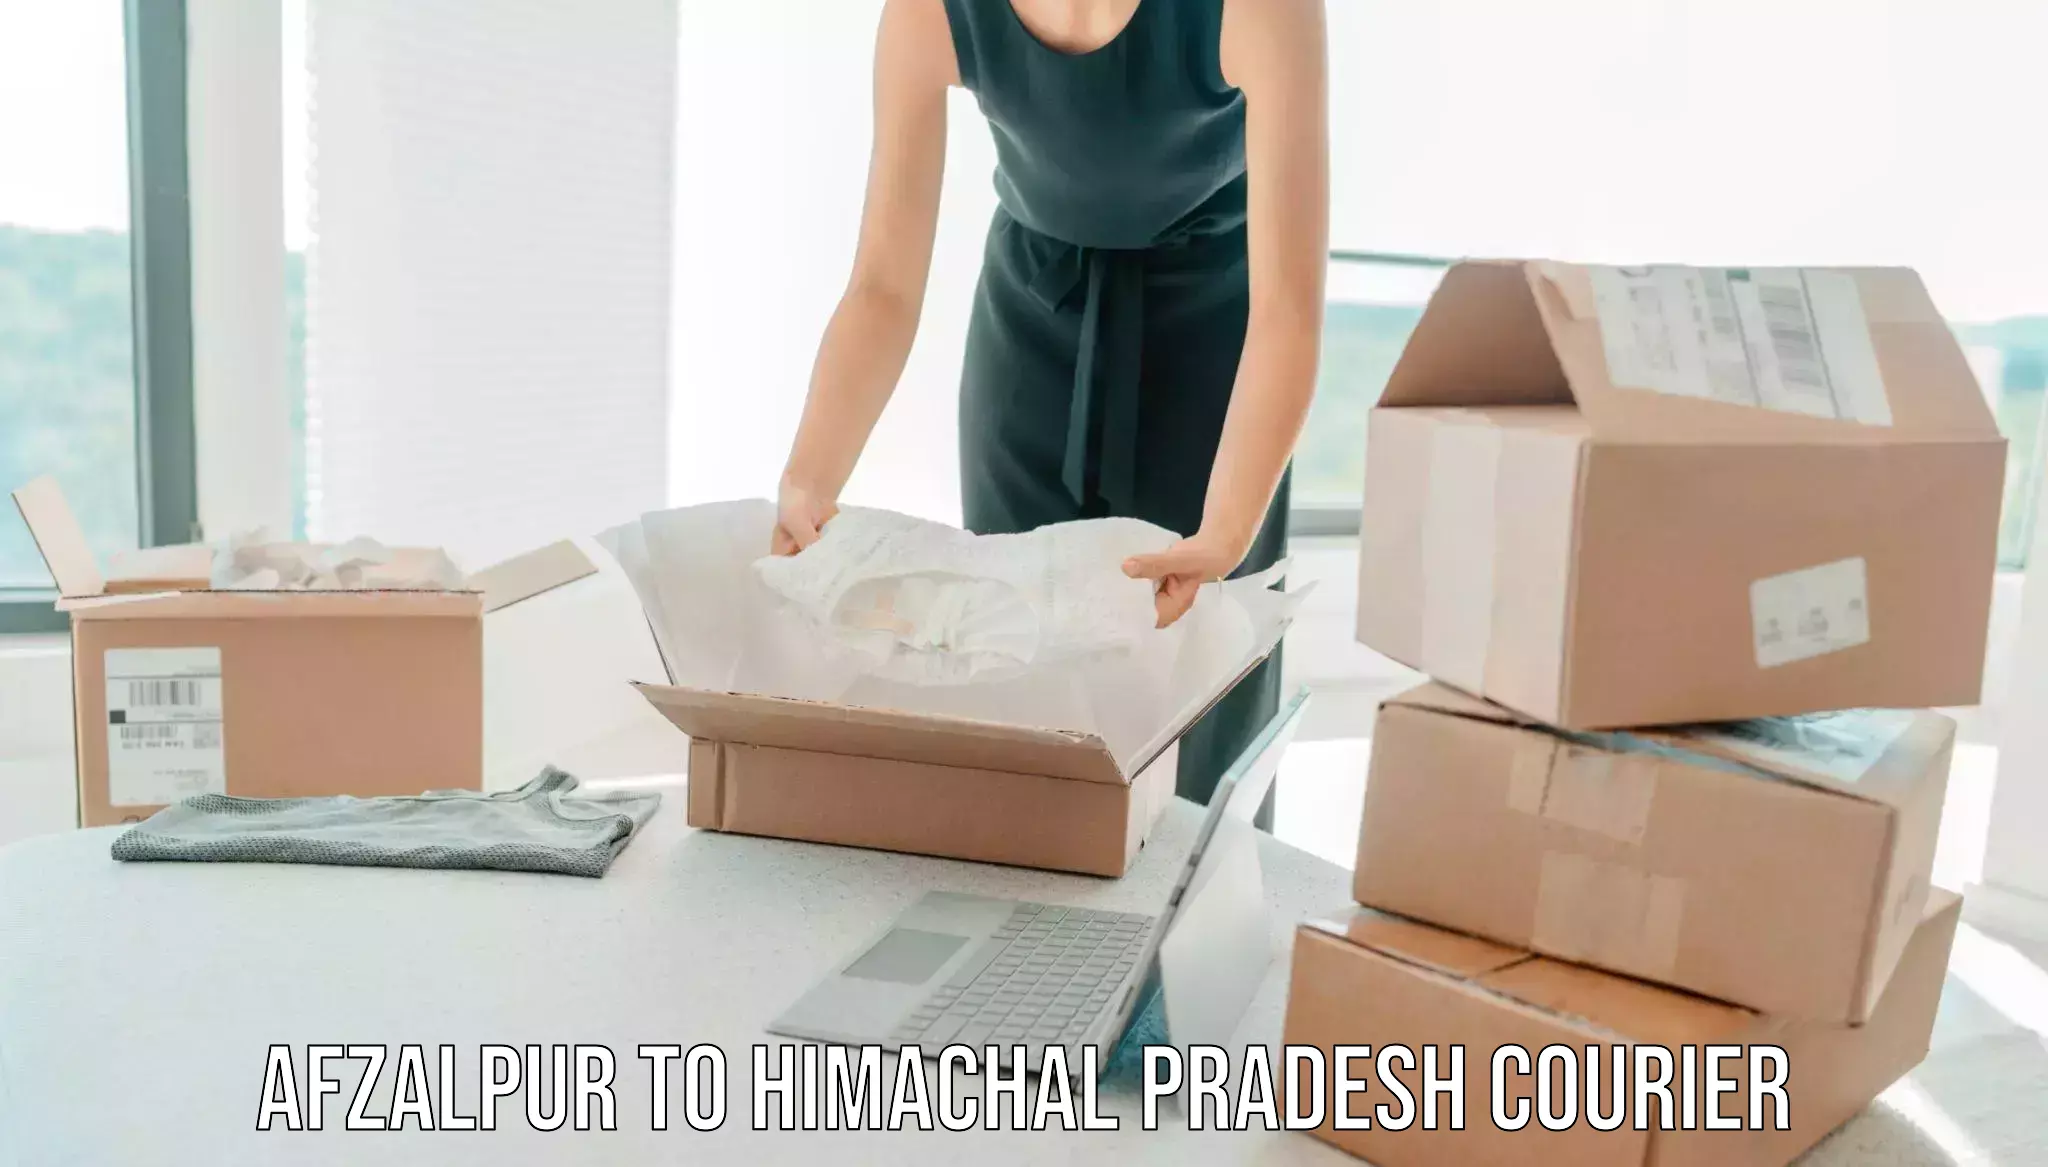 Specialized moving company Afzalpur to Himachal Pradesh